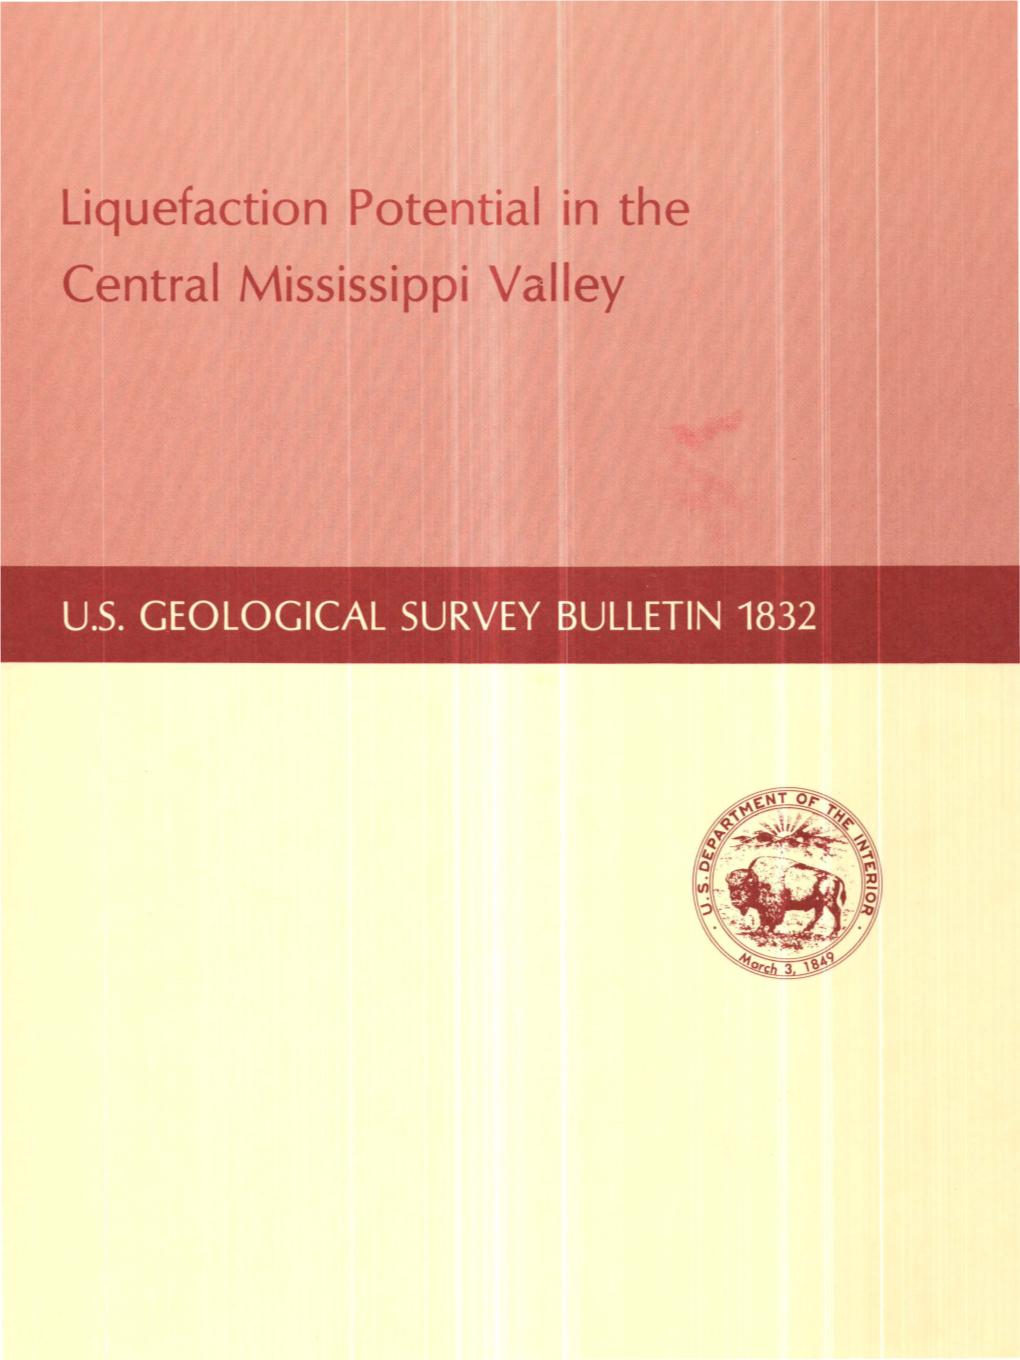 Liquefaction Potential in the Central Mississippi Valley